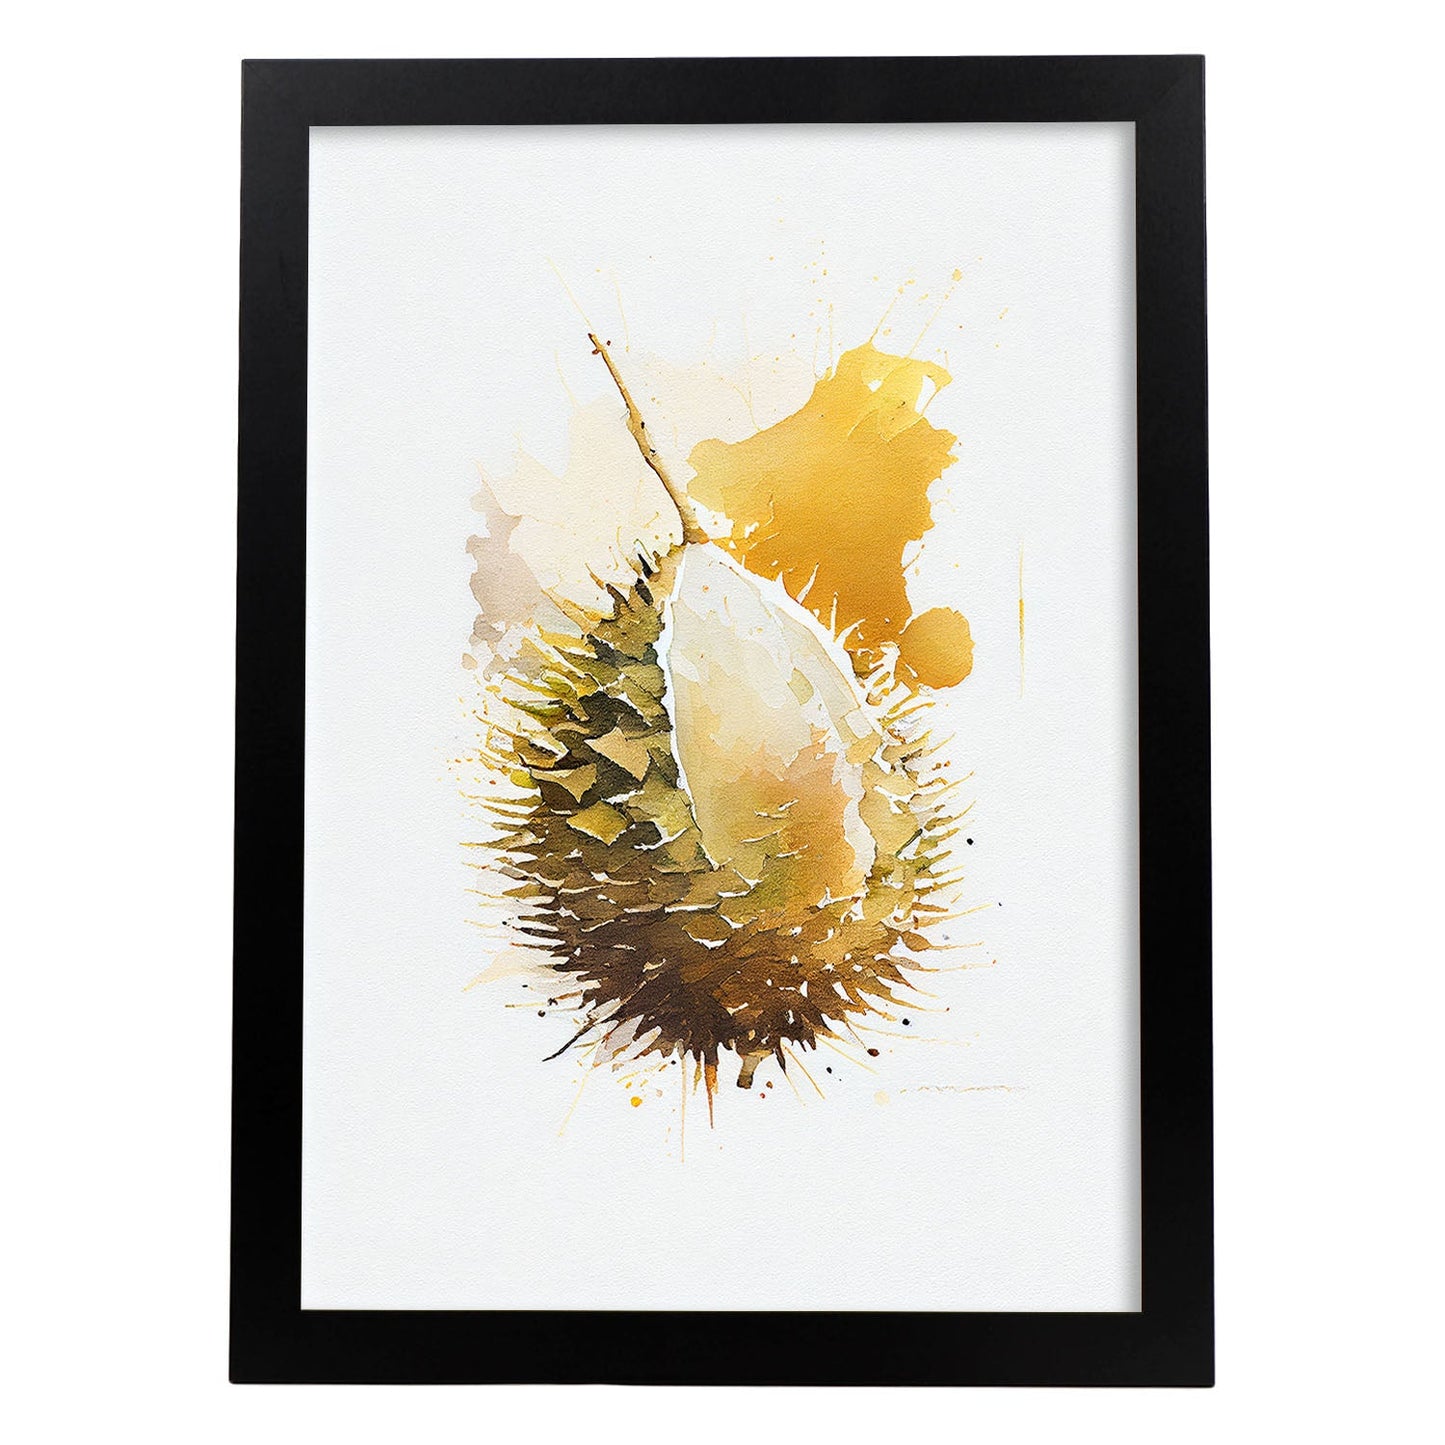 Nacnic minimalist Durian. Aesthetic Wall Art Prints for Bedroom or Living Room Design.